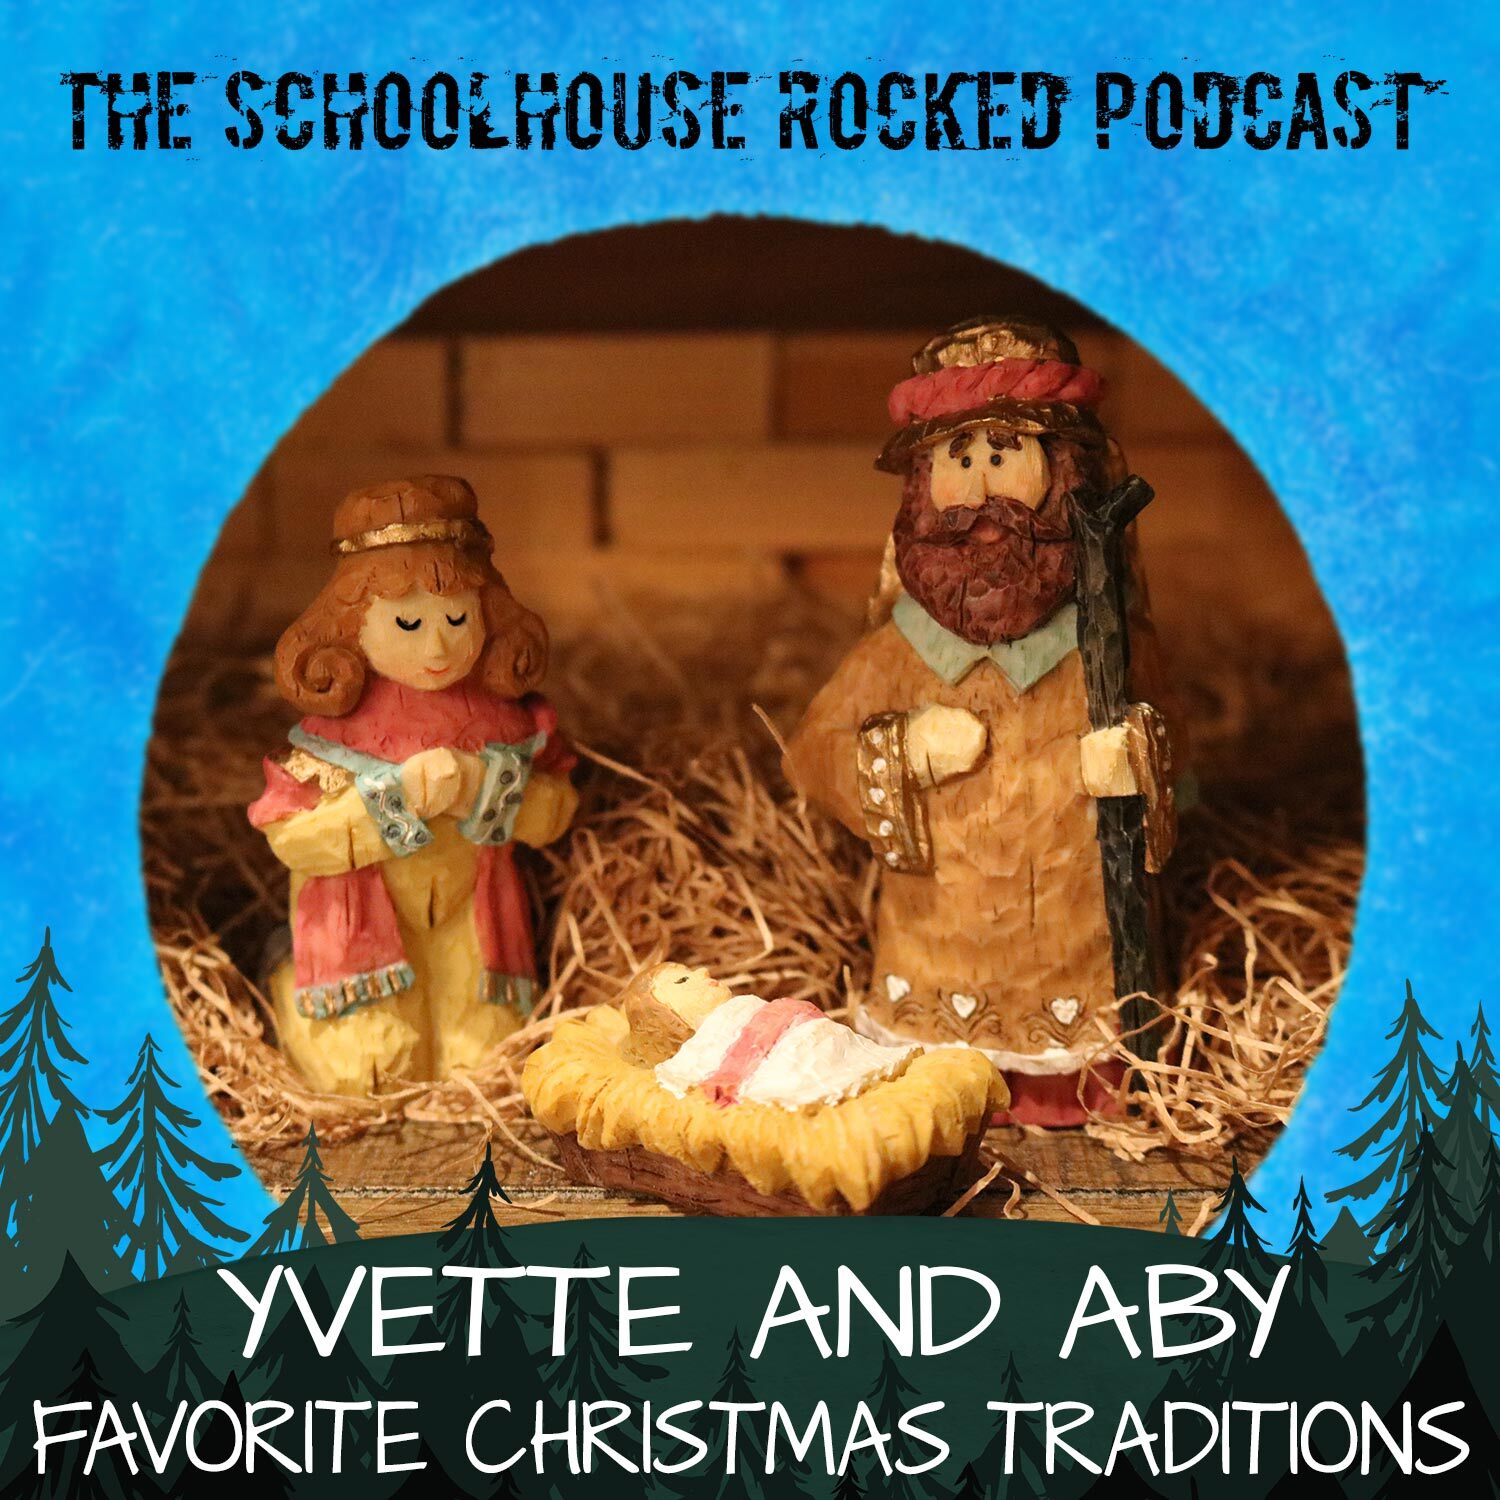 Our Favorite Christmas Traditions - Yvette Hampton and Aby Rinella